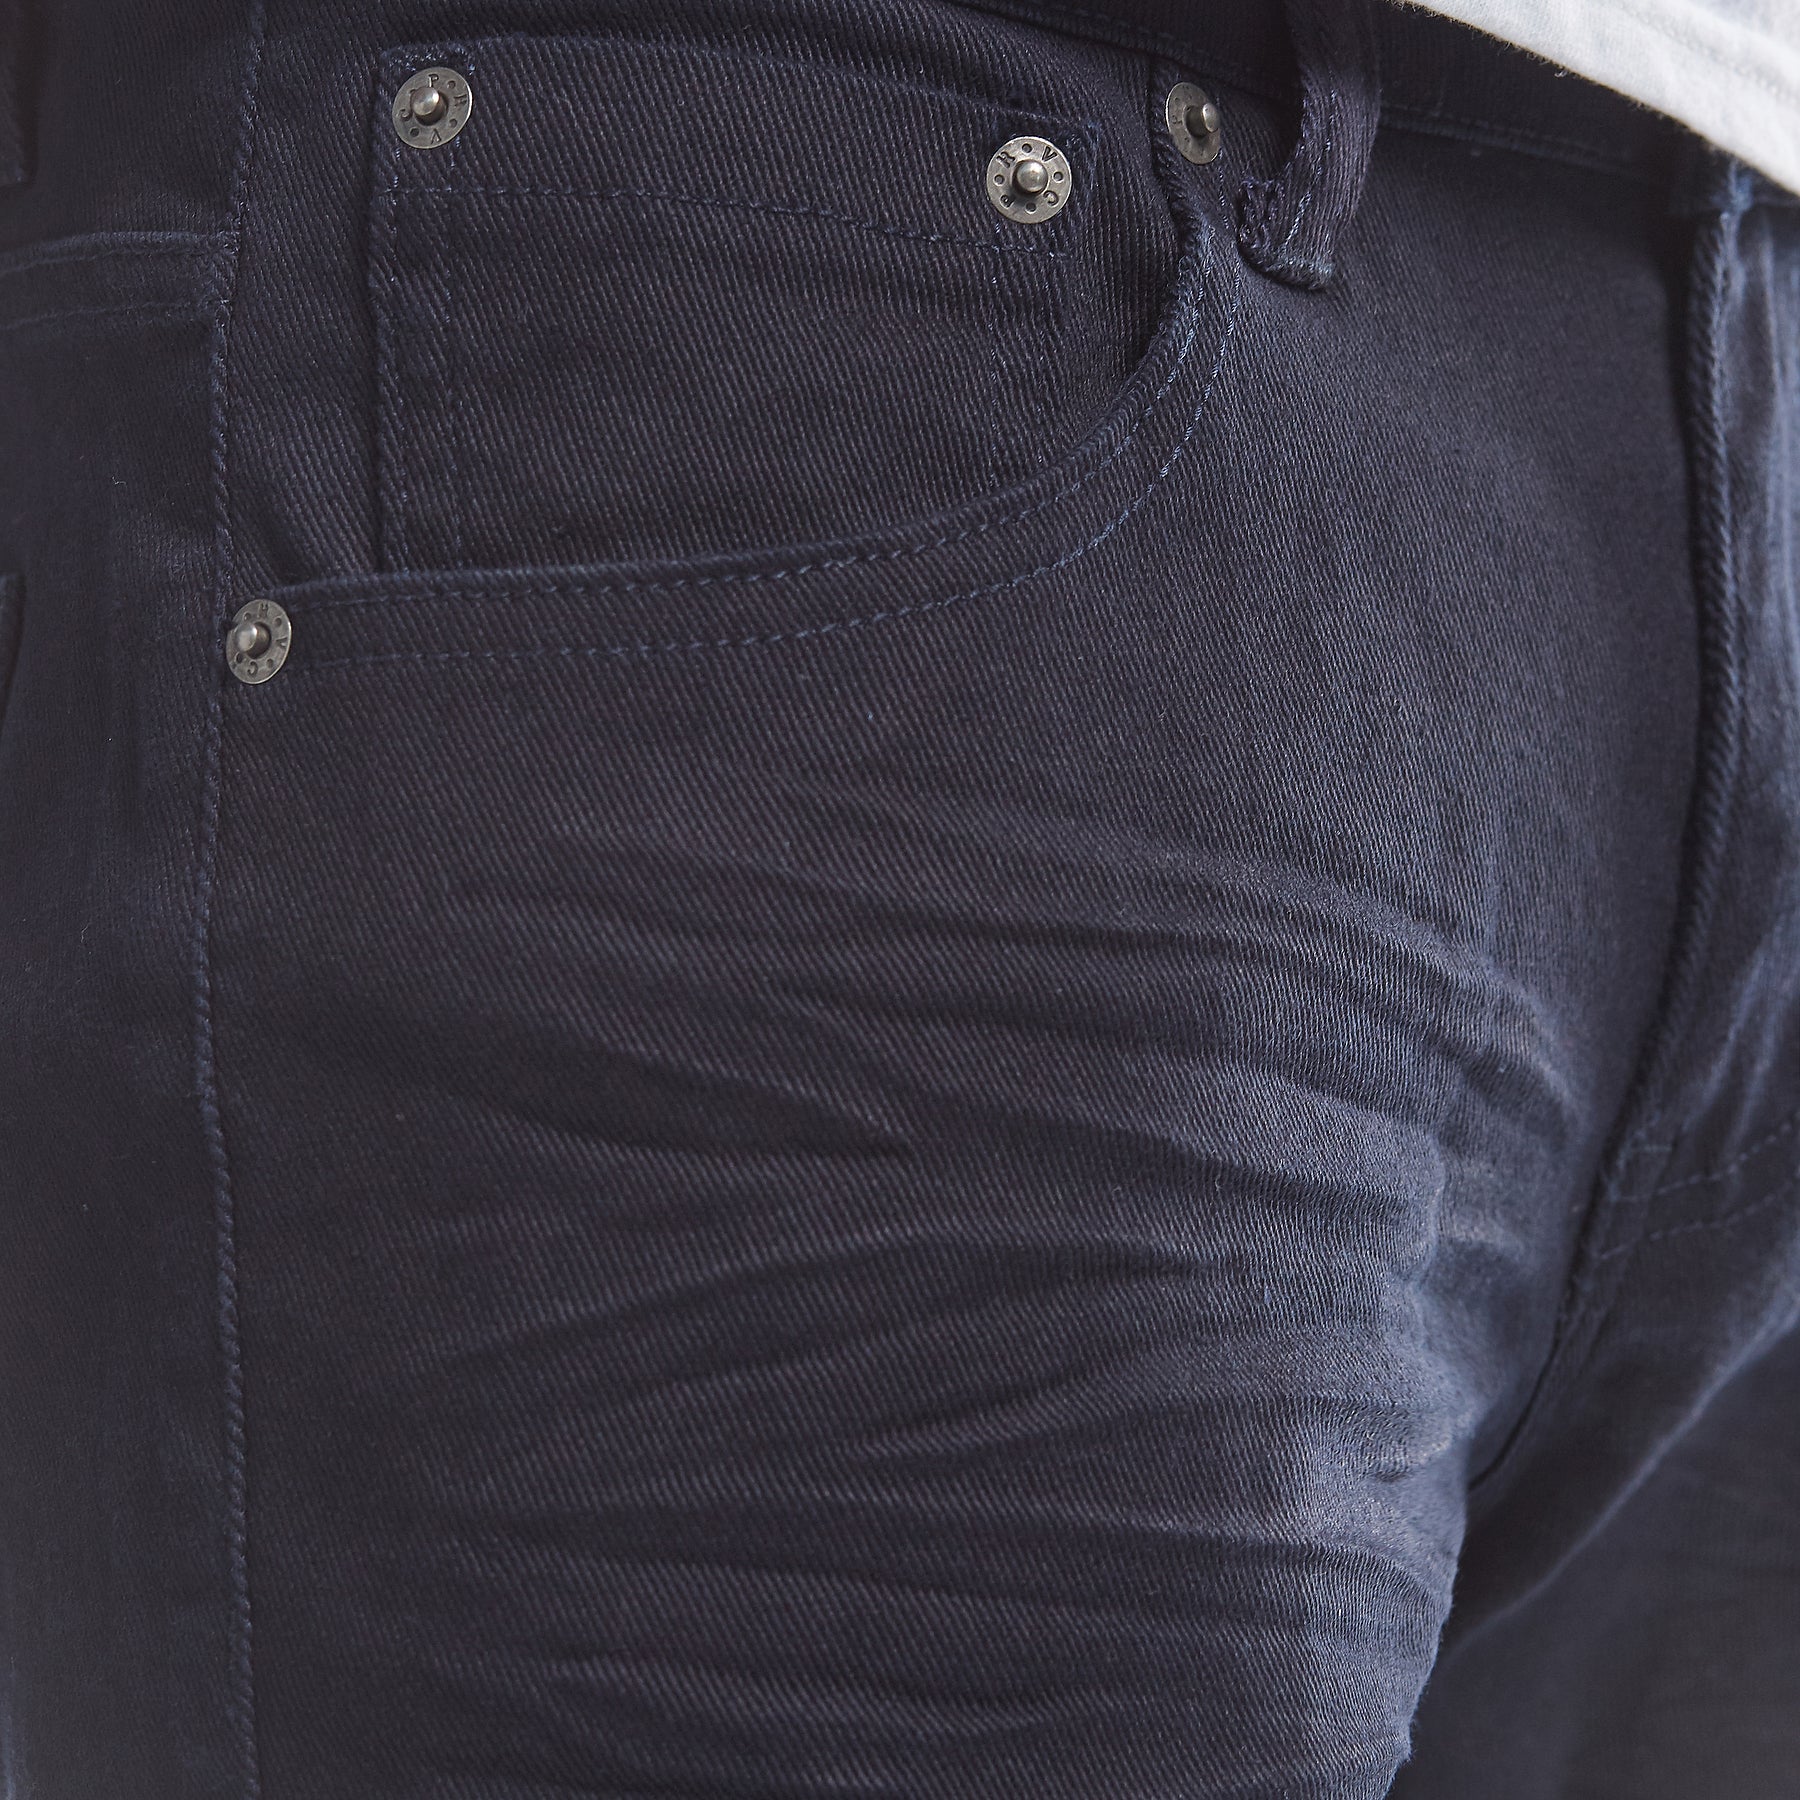 NAVY PANTS WITH RIPS - Copper Rivet